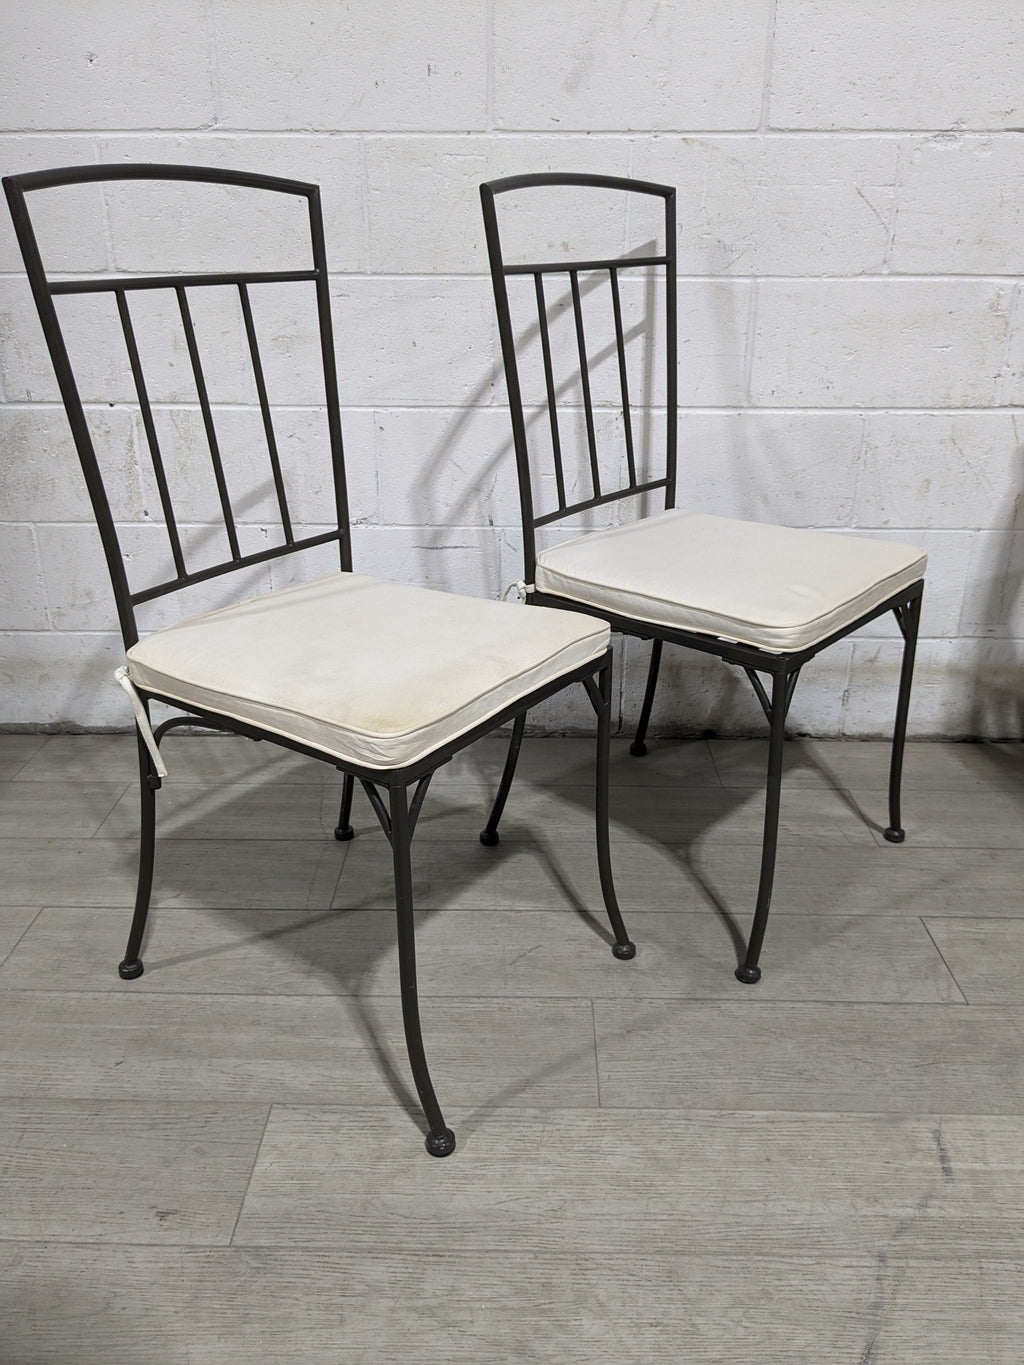 Set of Patio Chairs